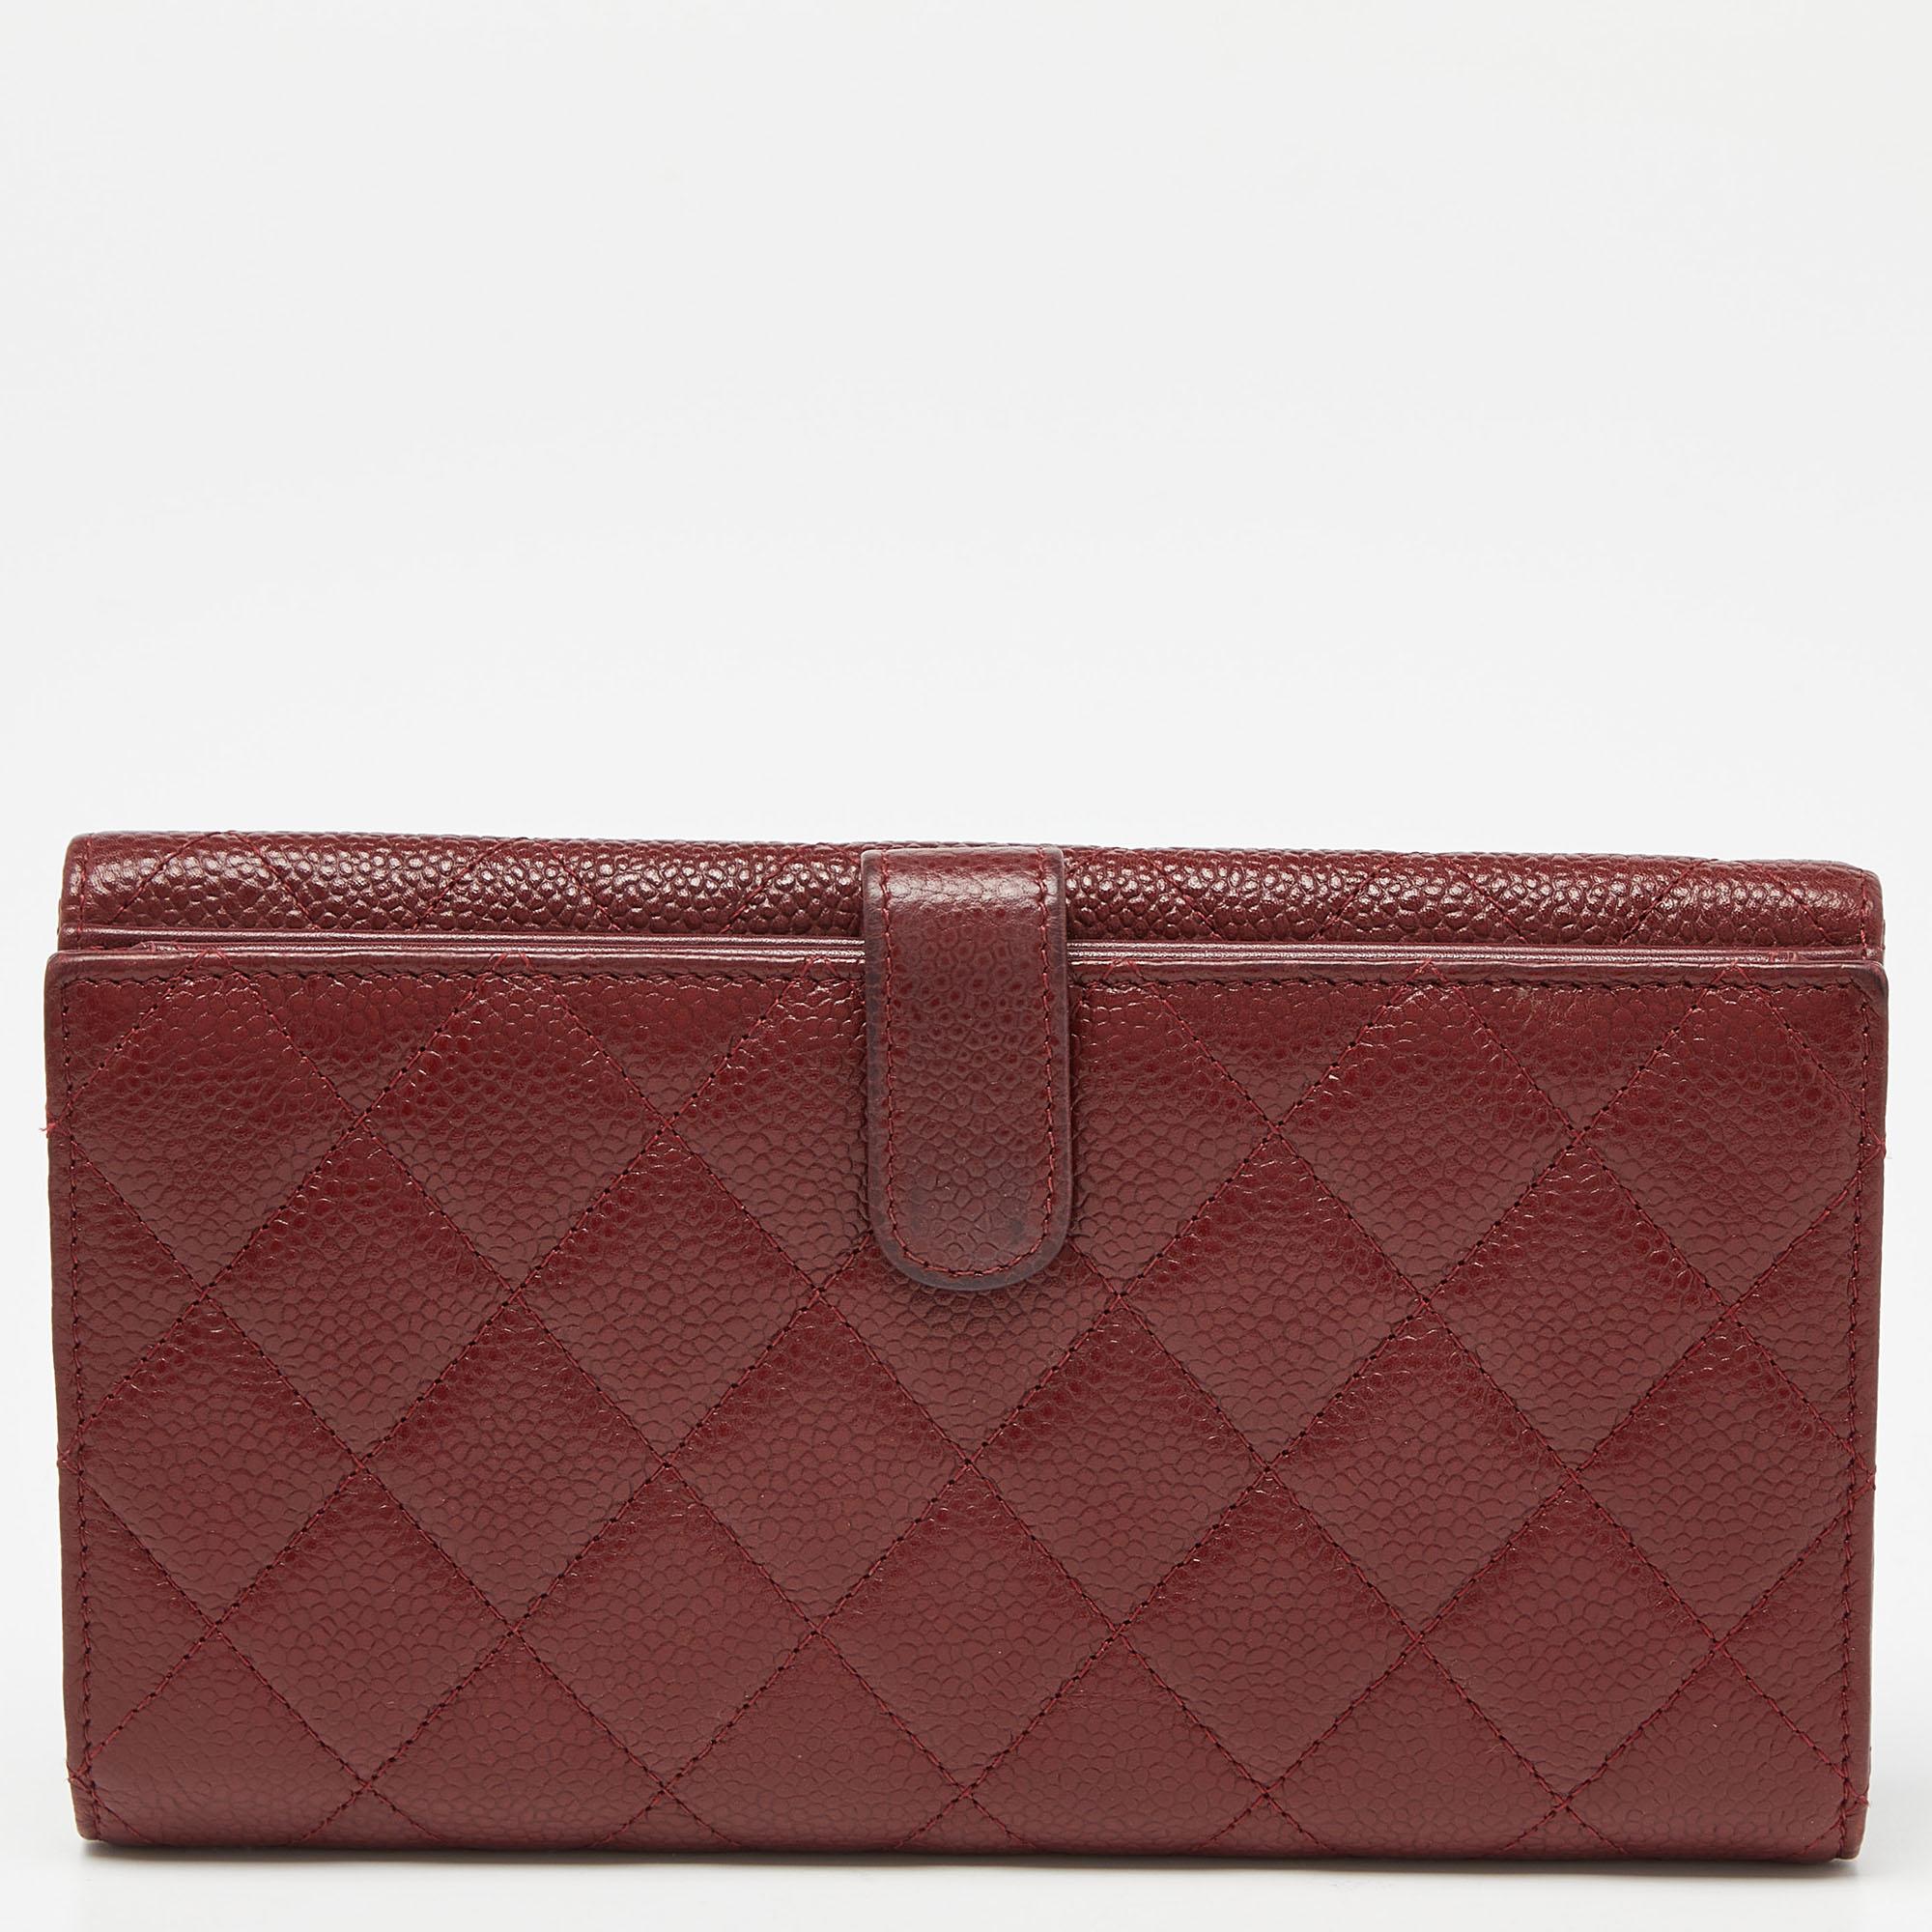 This gorgeous wallet from the house of Chanel is crafted from leather and carries a lovely quilted exterior. Styled with a CC-adorned flap and equipped with multiple slots, it is a must-have.

Includes: Original Dustbag, Authenticity Card, Original